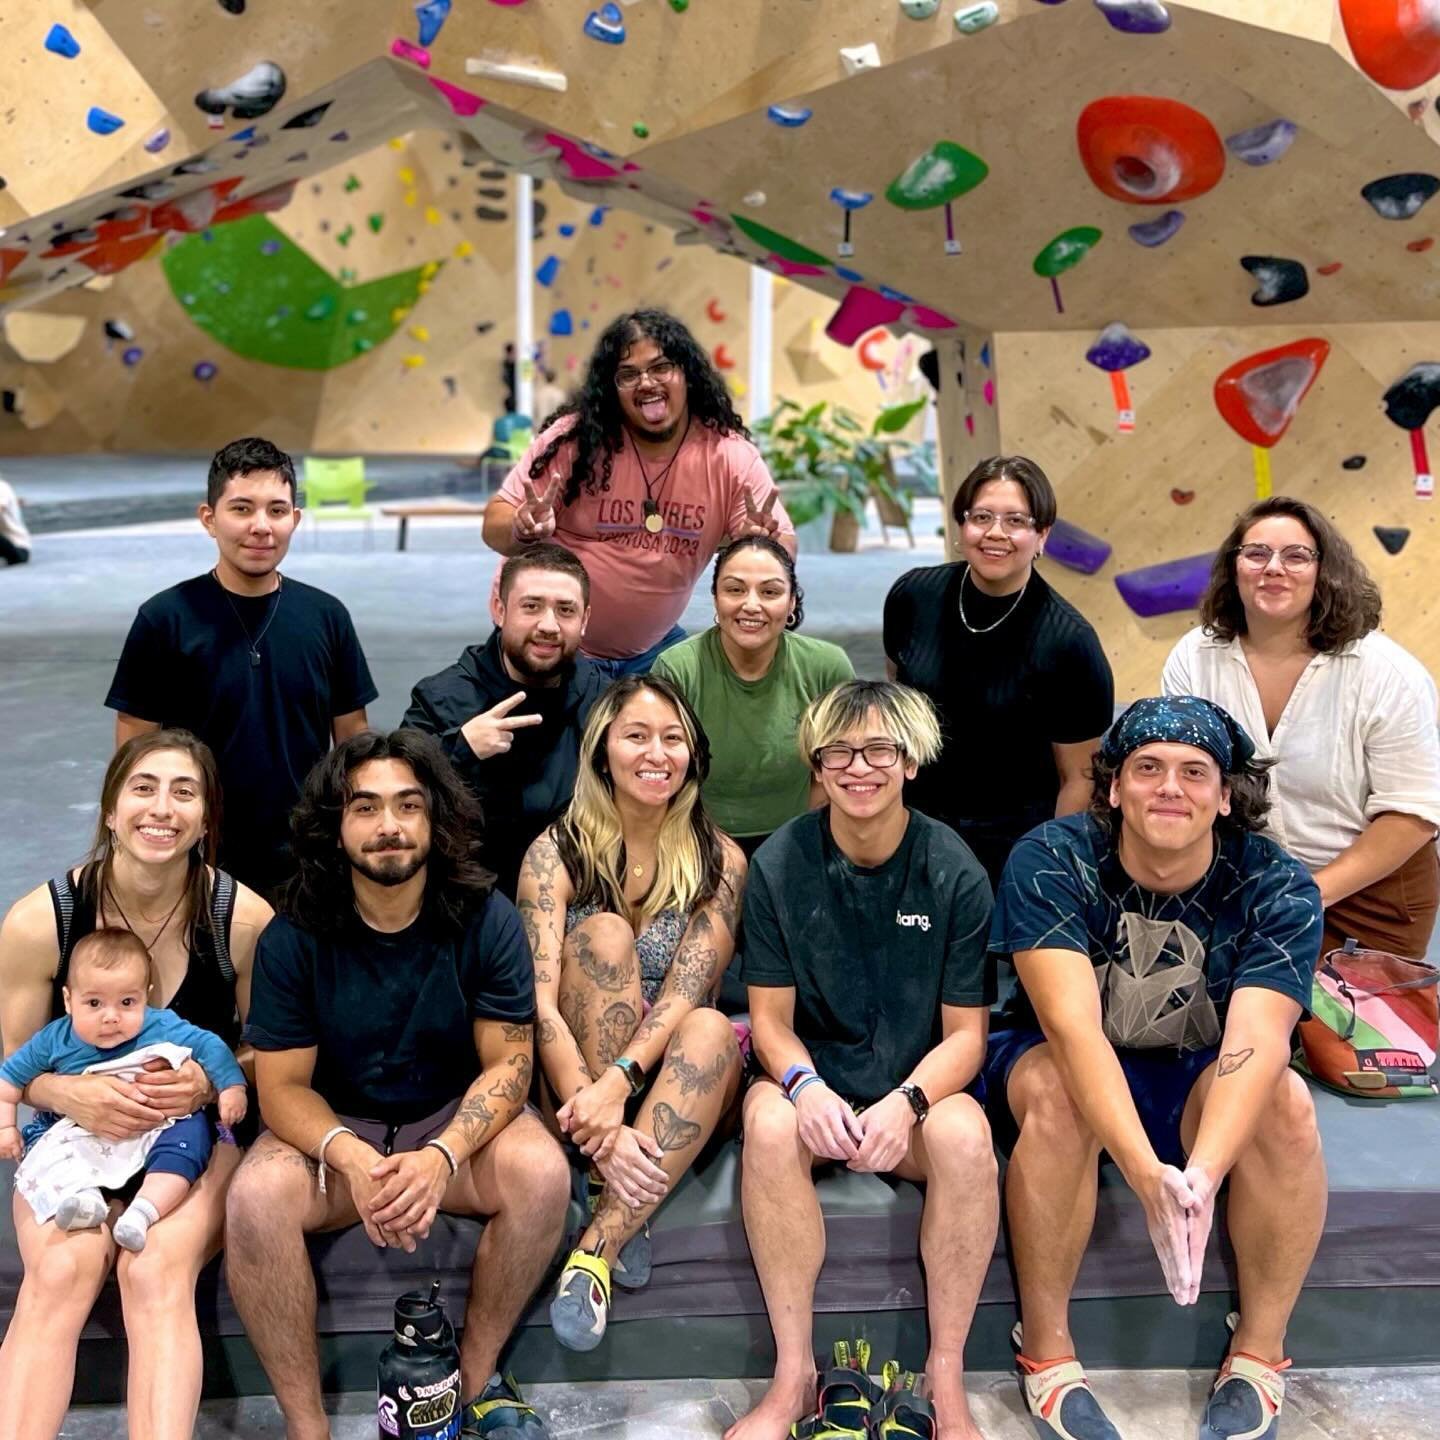 The Escala crew @evolutionboulders 😝✌🏽🦖

Thanks to everyone who came out for our meetup at Evolution Boulders! Siempre un tiempazo con ustedes. Shout-out to our ambassadors Emma and Eliza for hosting 🫶🏽 See y&rsquo;all next month!